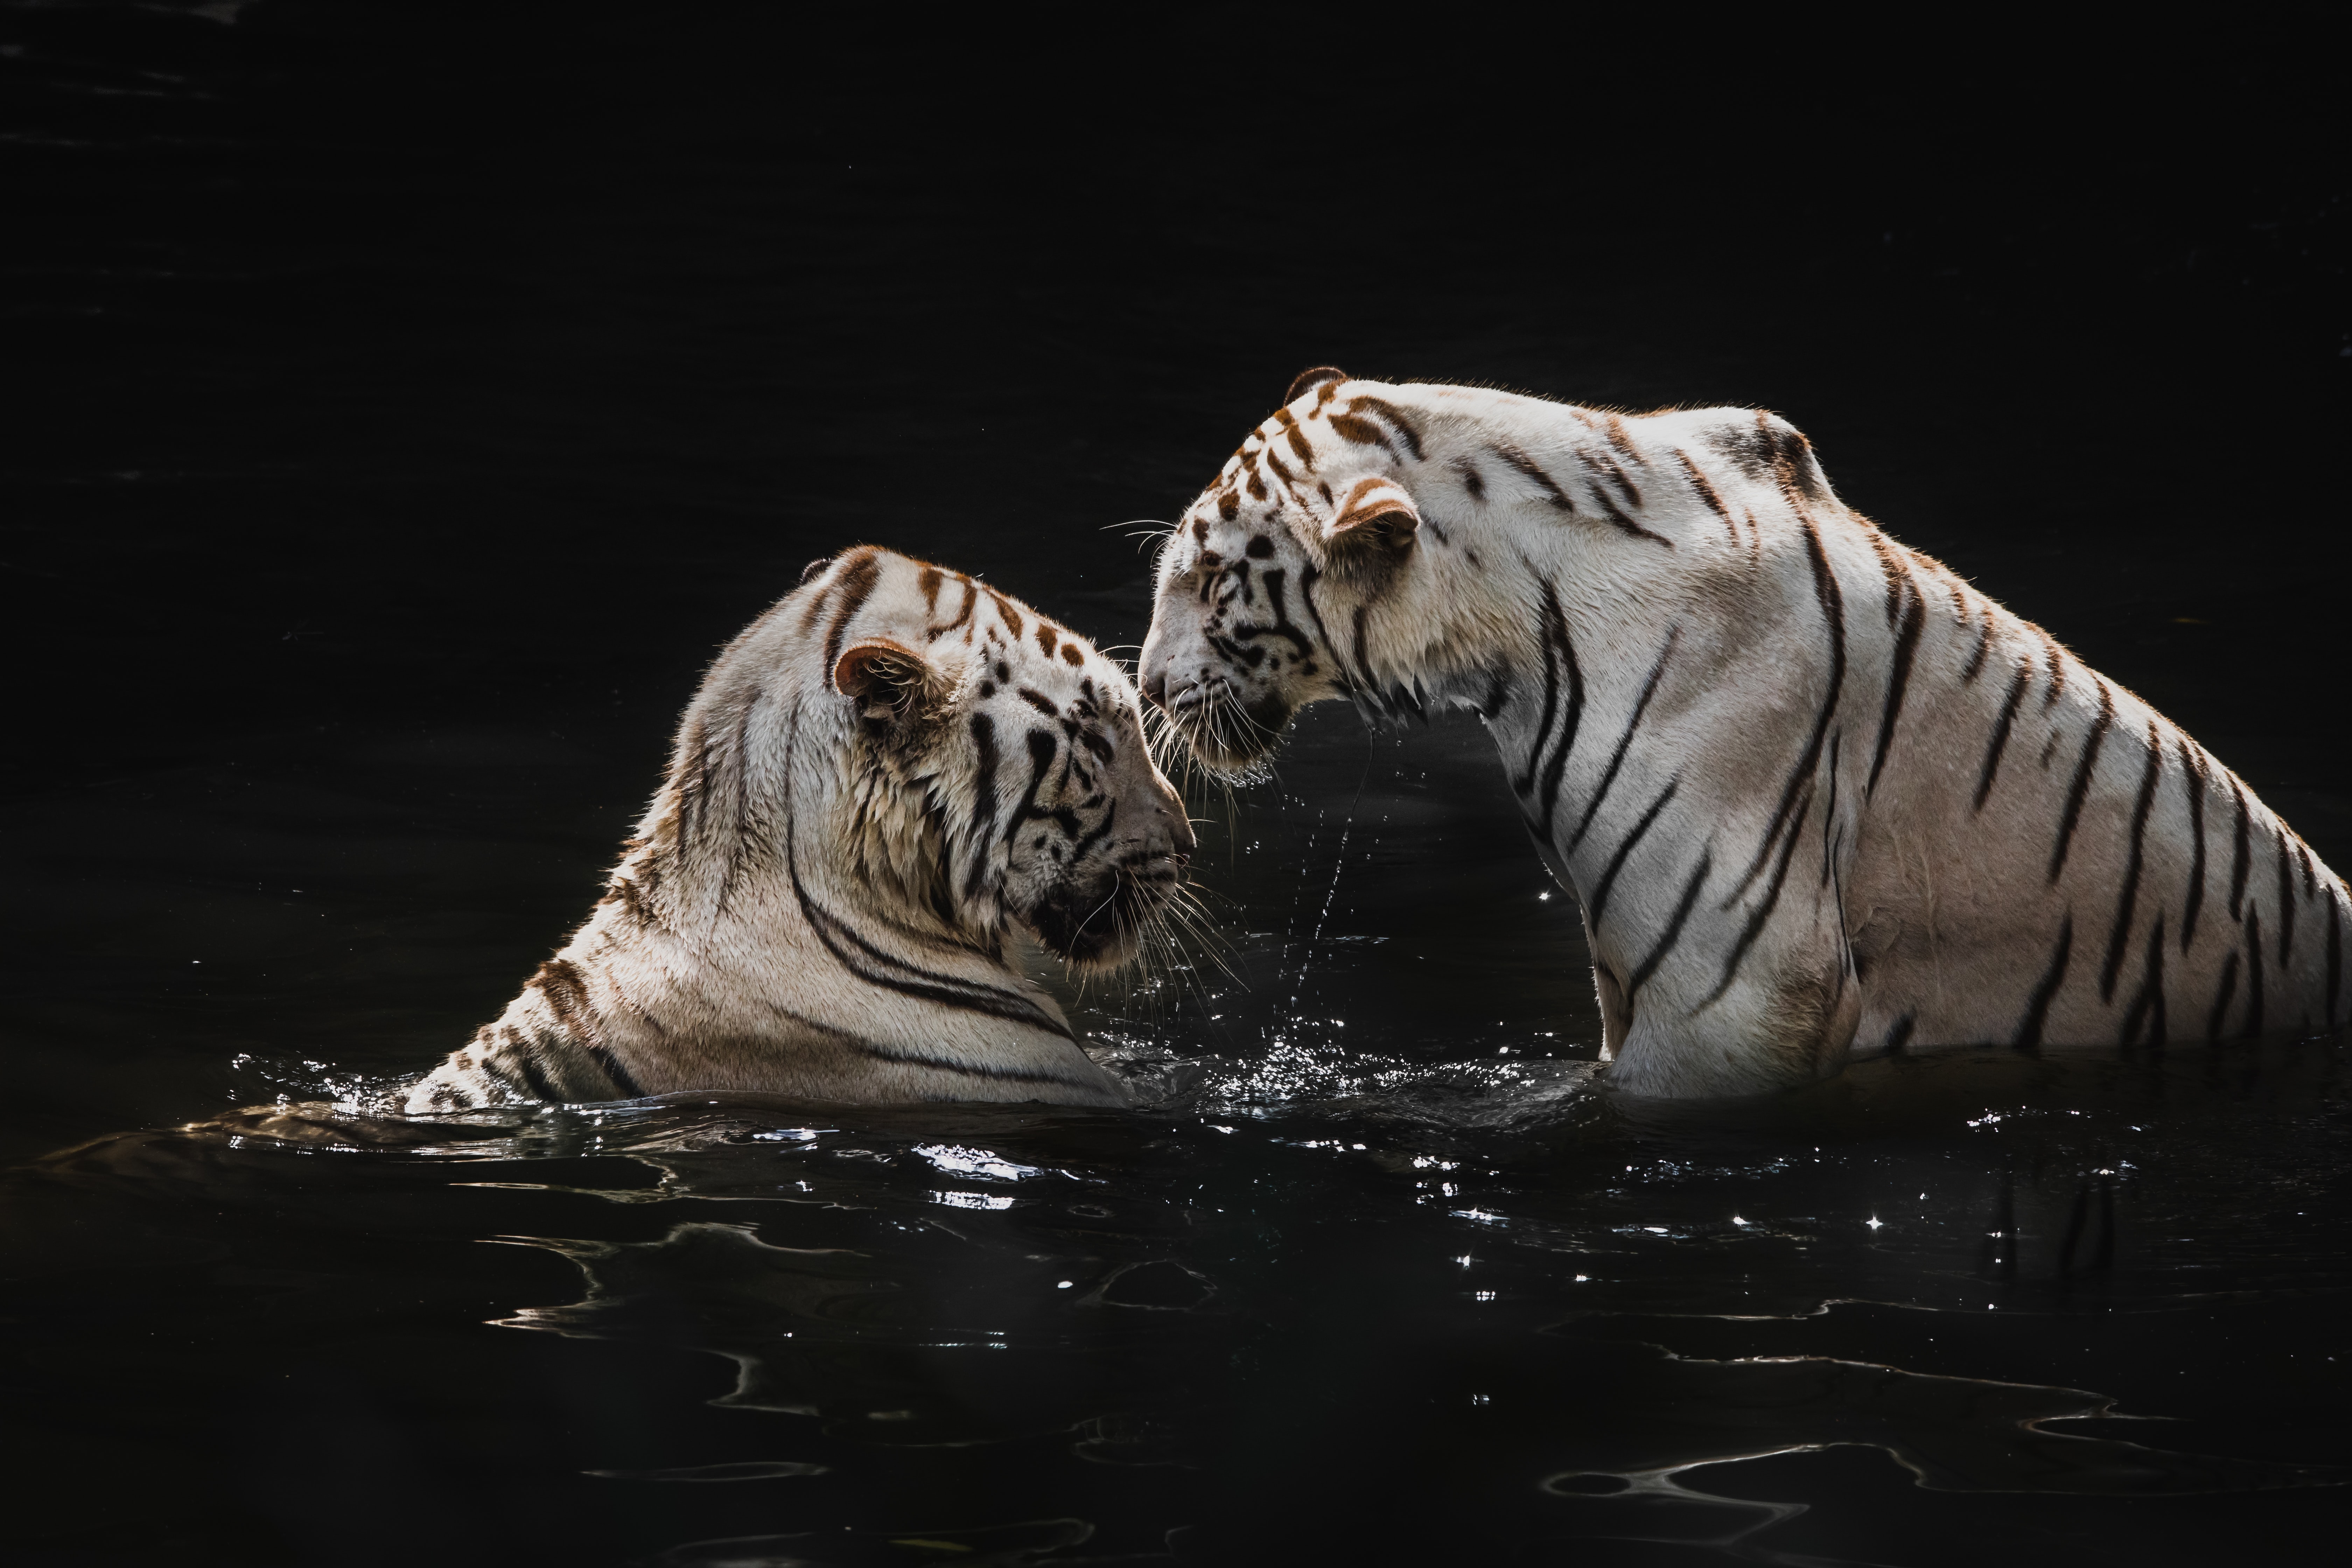 132478 download wallpaper tigers, animals, water, big cats, white tigers screensavers and pictures for free